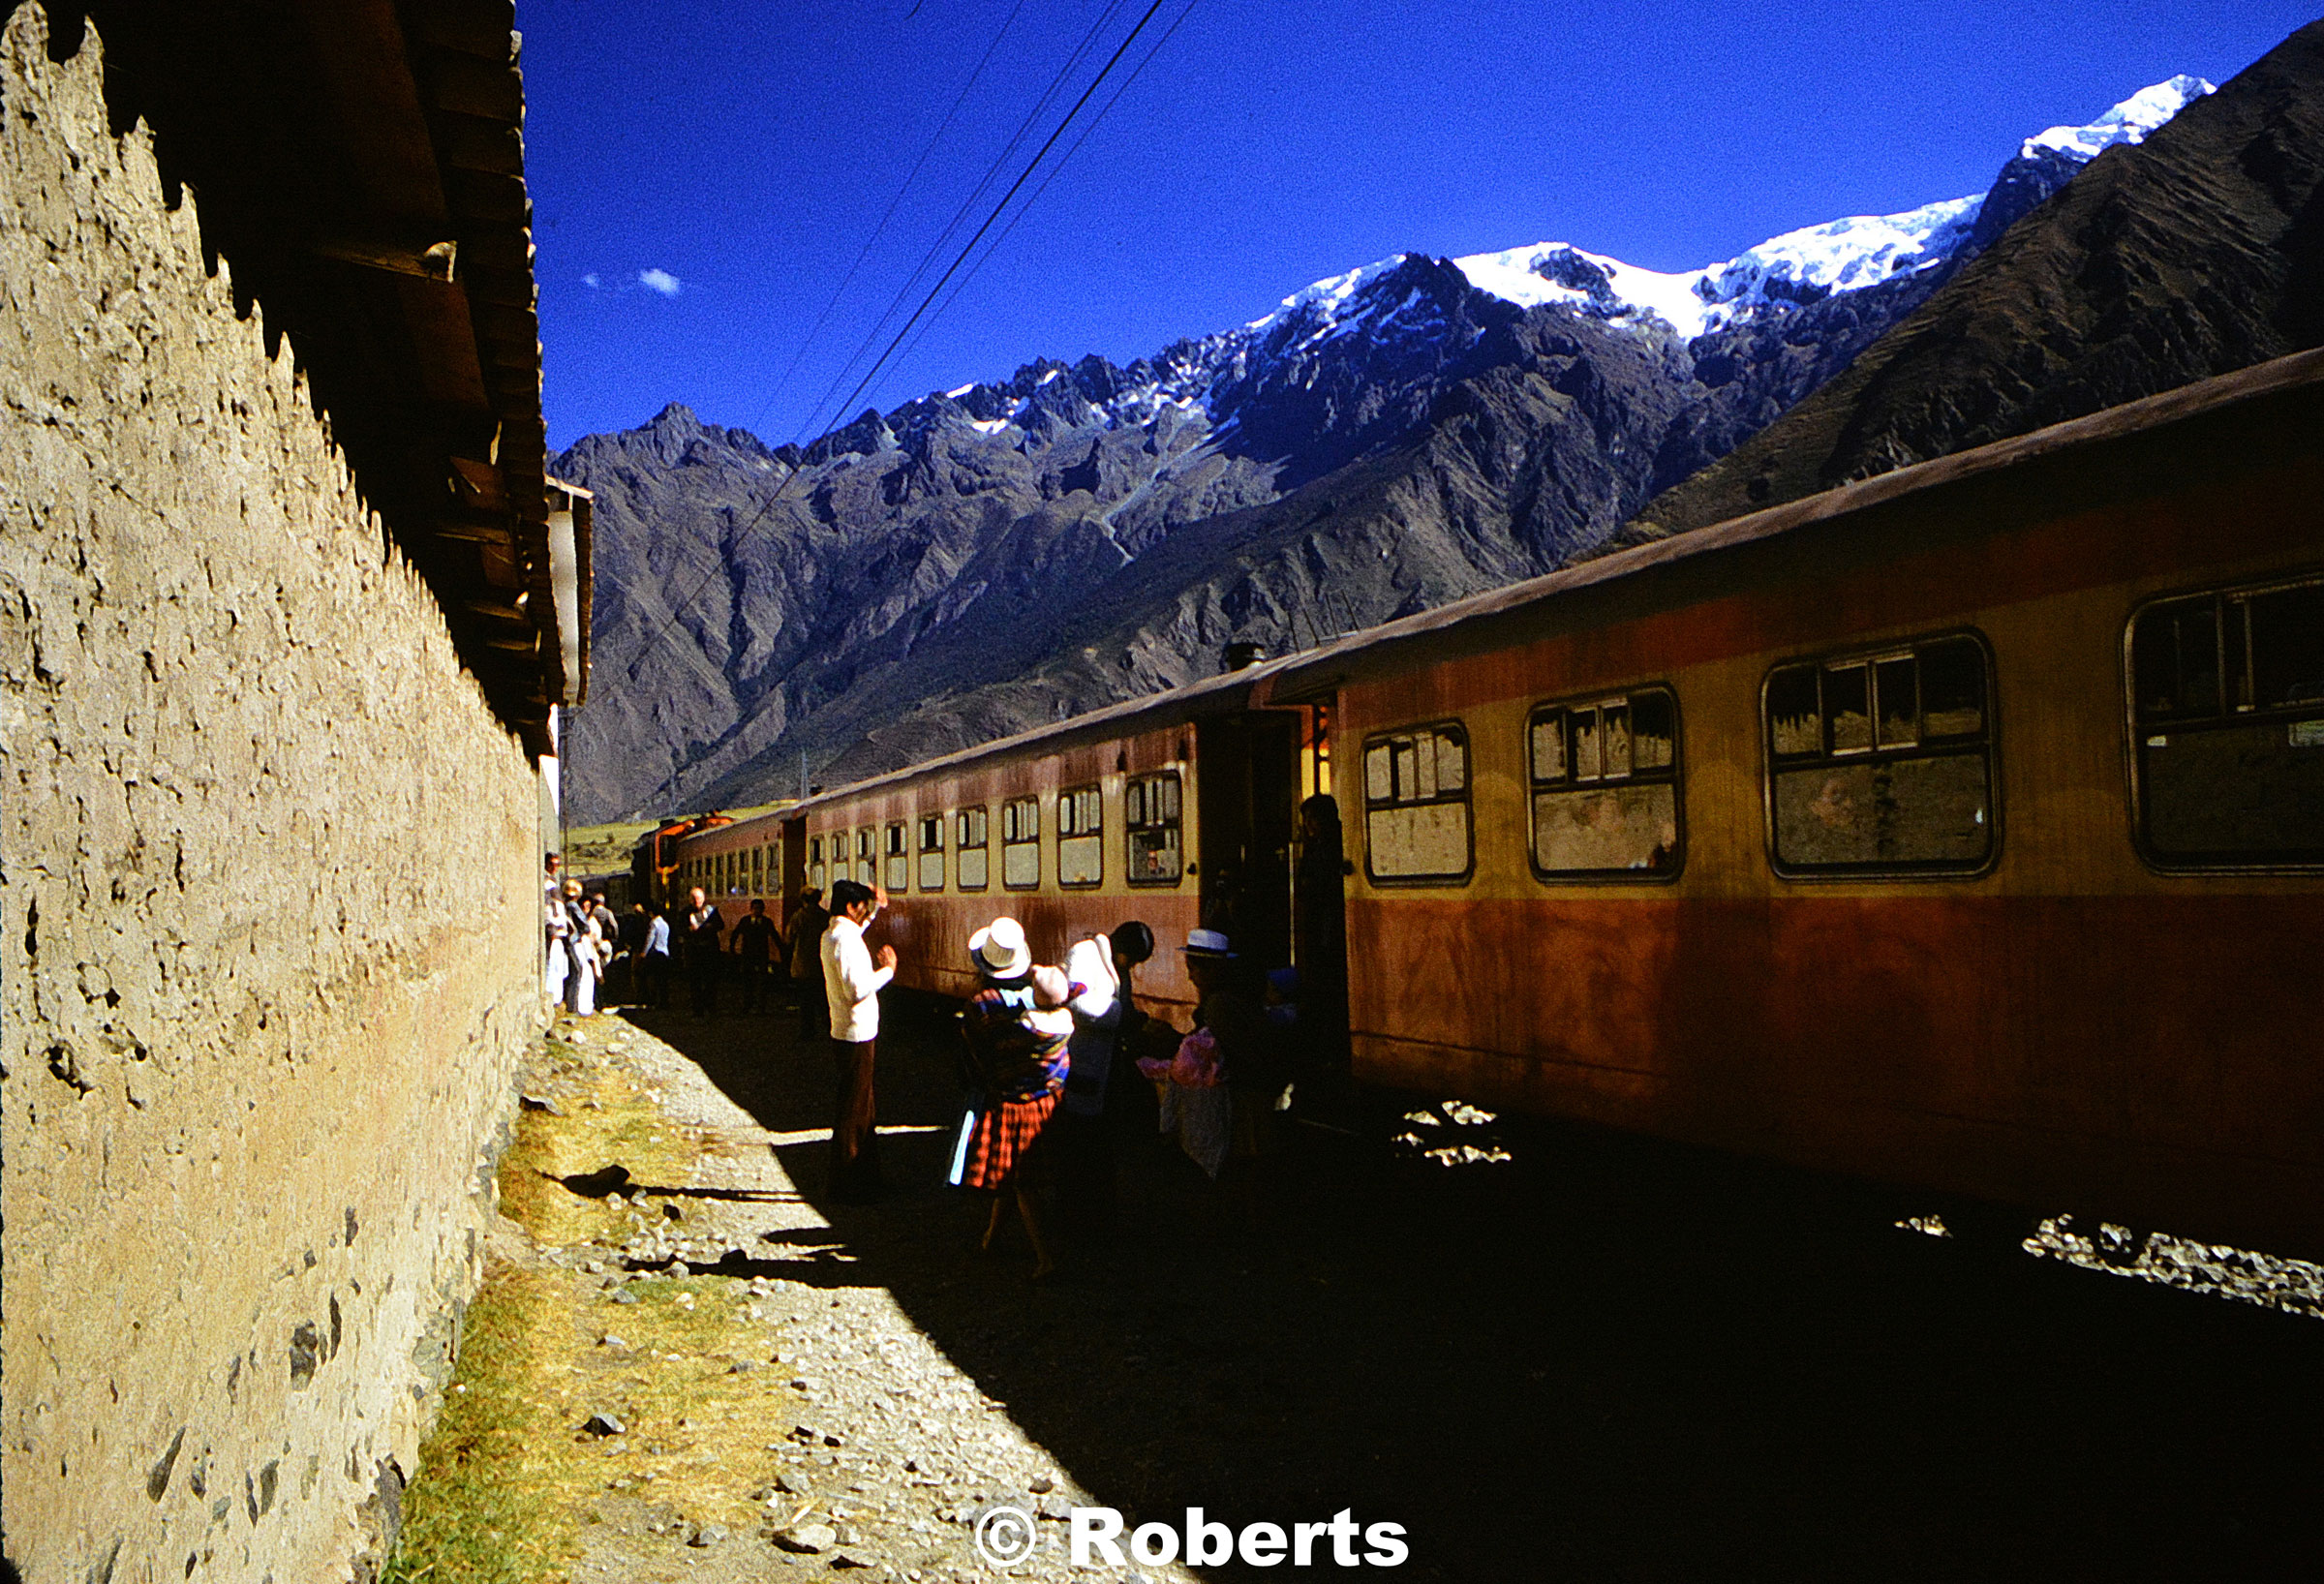 Train to and from the Machu Picchu archaeological site. Peru. June, 1977.